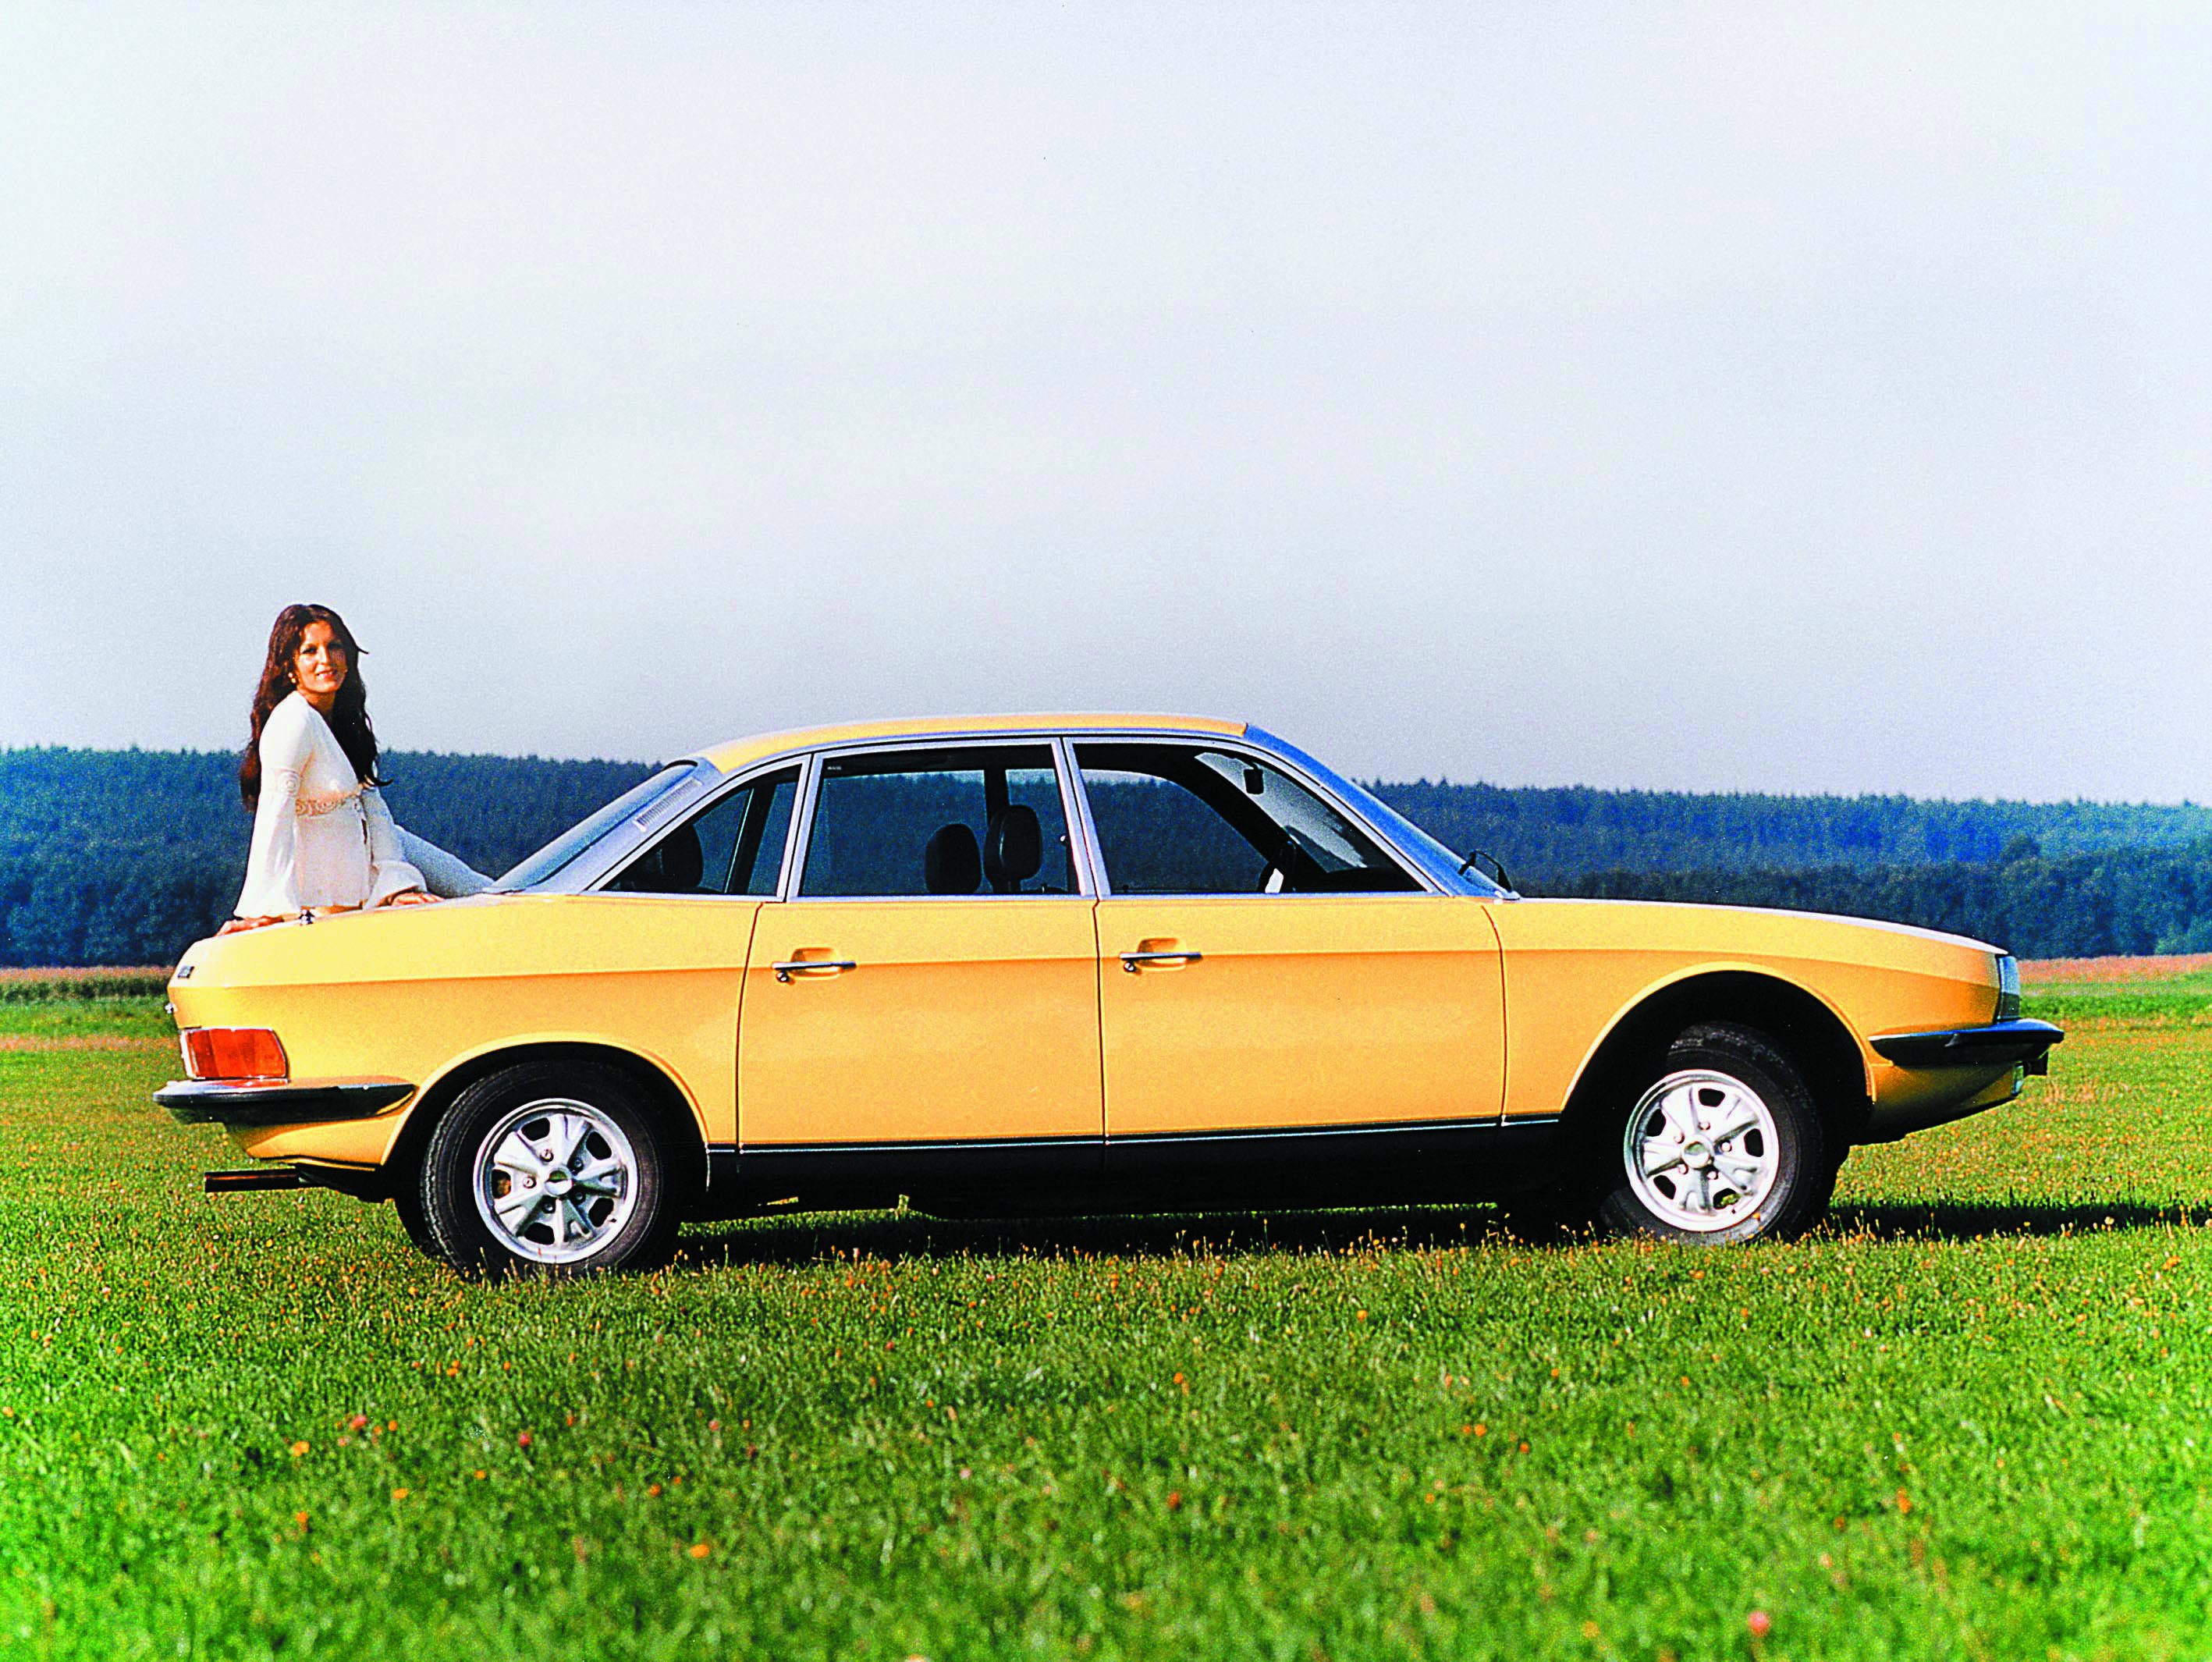 The NSU Ro 80 is the last car to bear the NSU name, a brand rich in tradition.